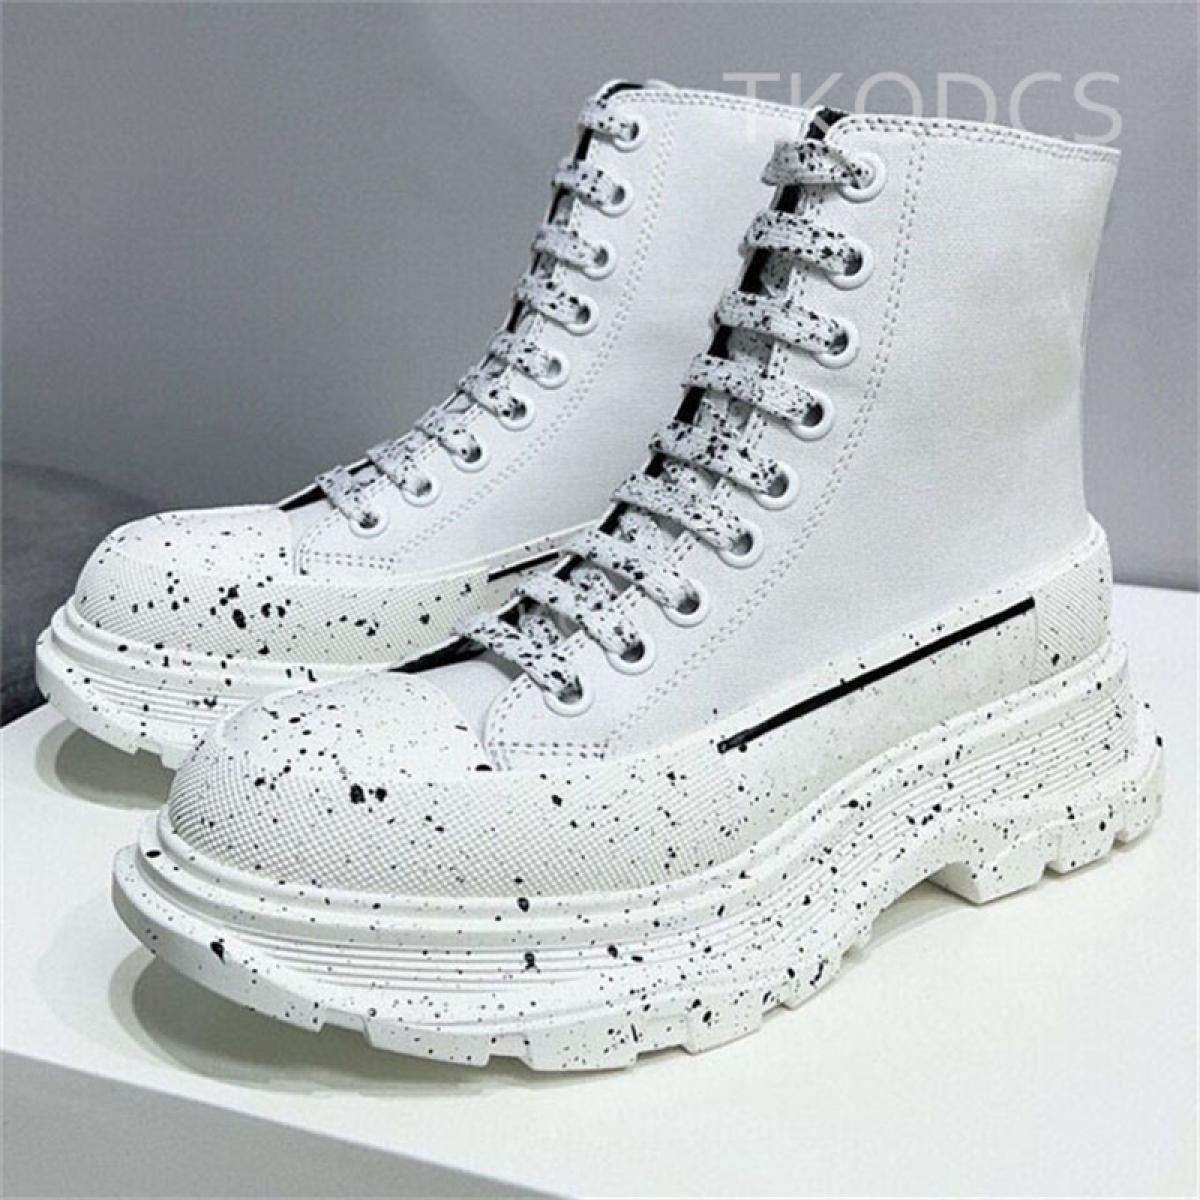 Runway Men Short Boots Platform Height Increasing Colorful Lace Up Lovers Shoes Designer Round Toe Flat Women High Top S